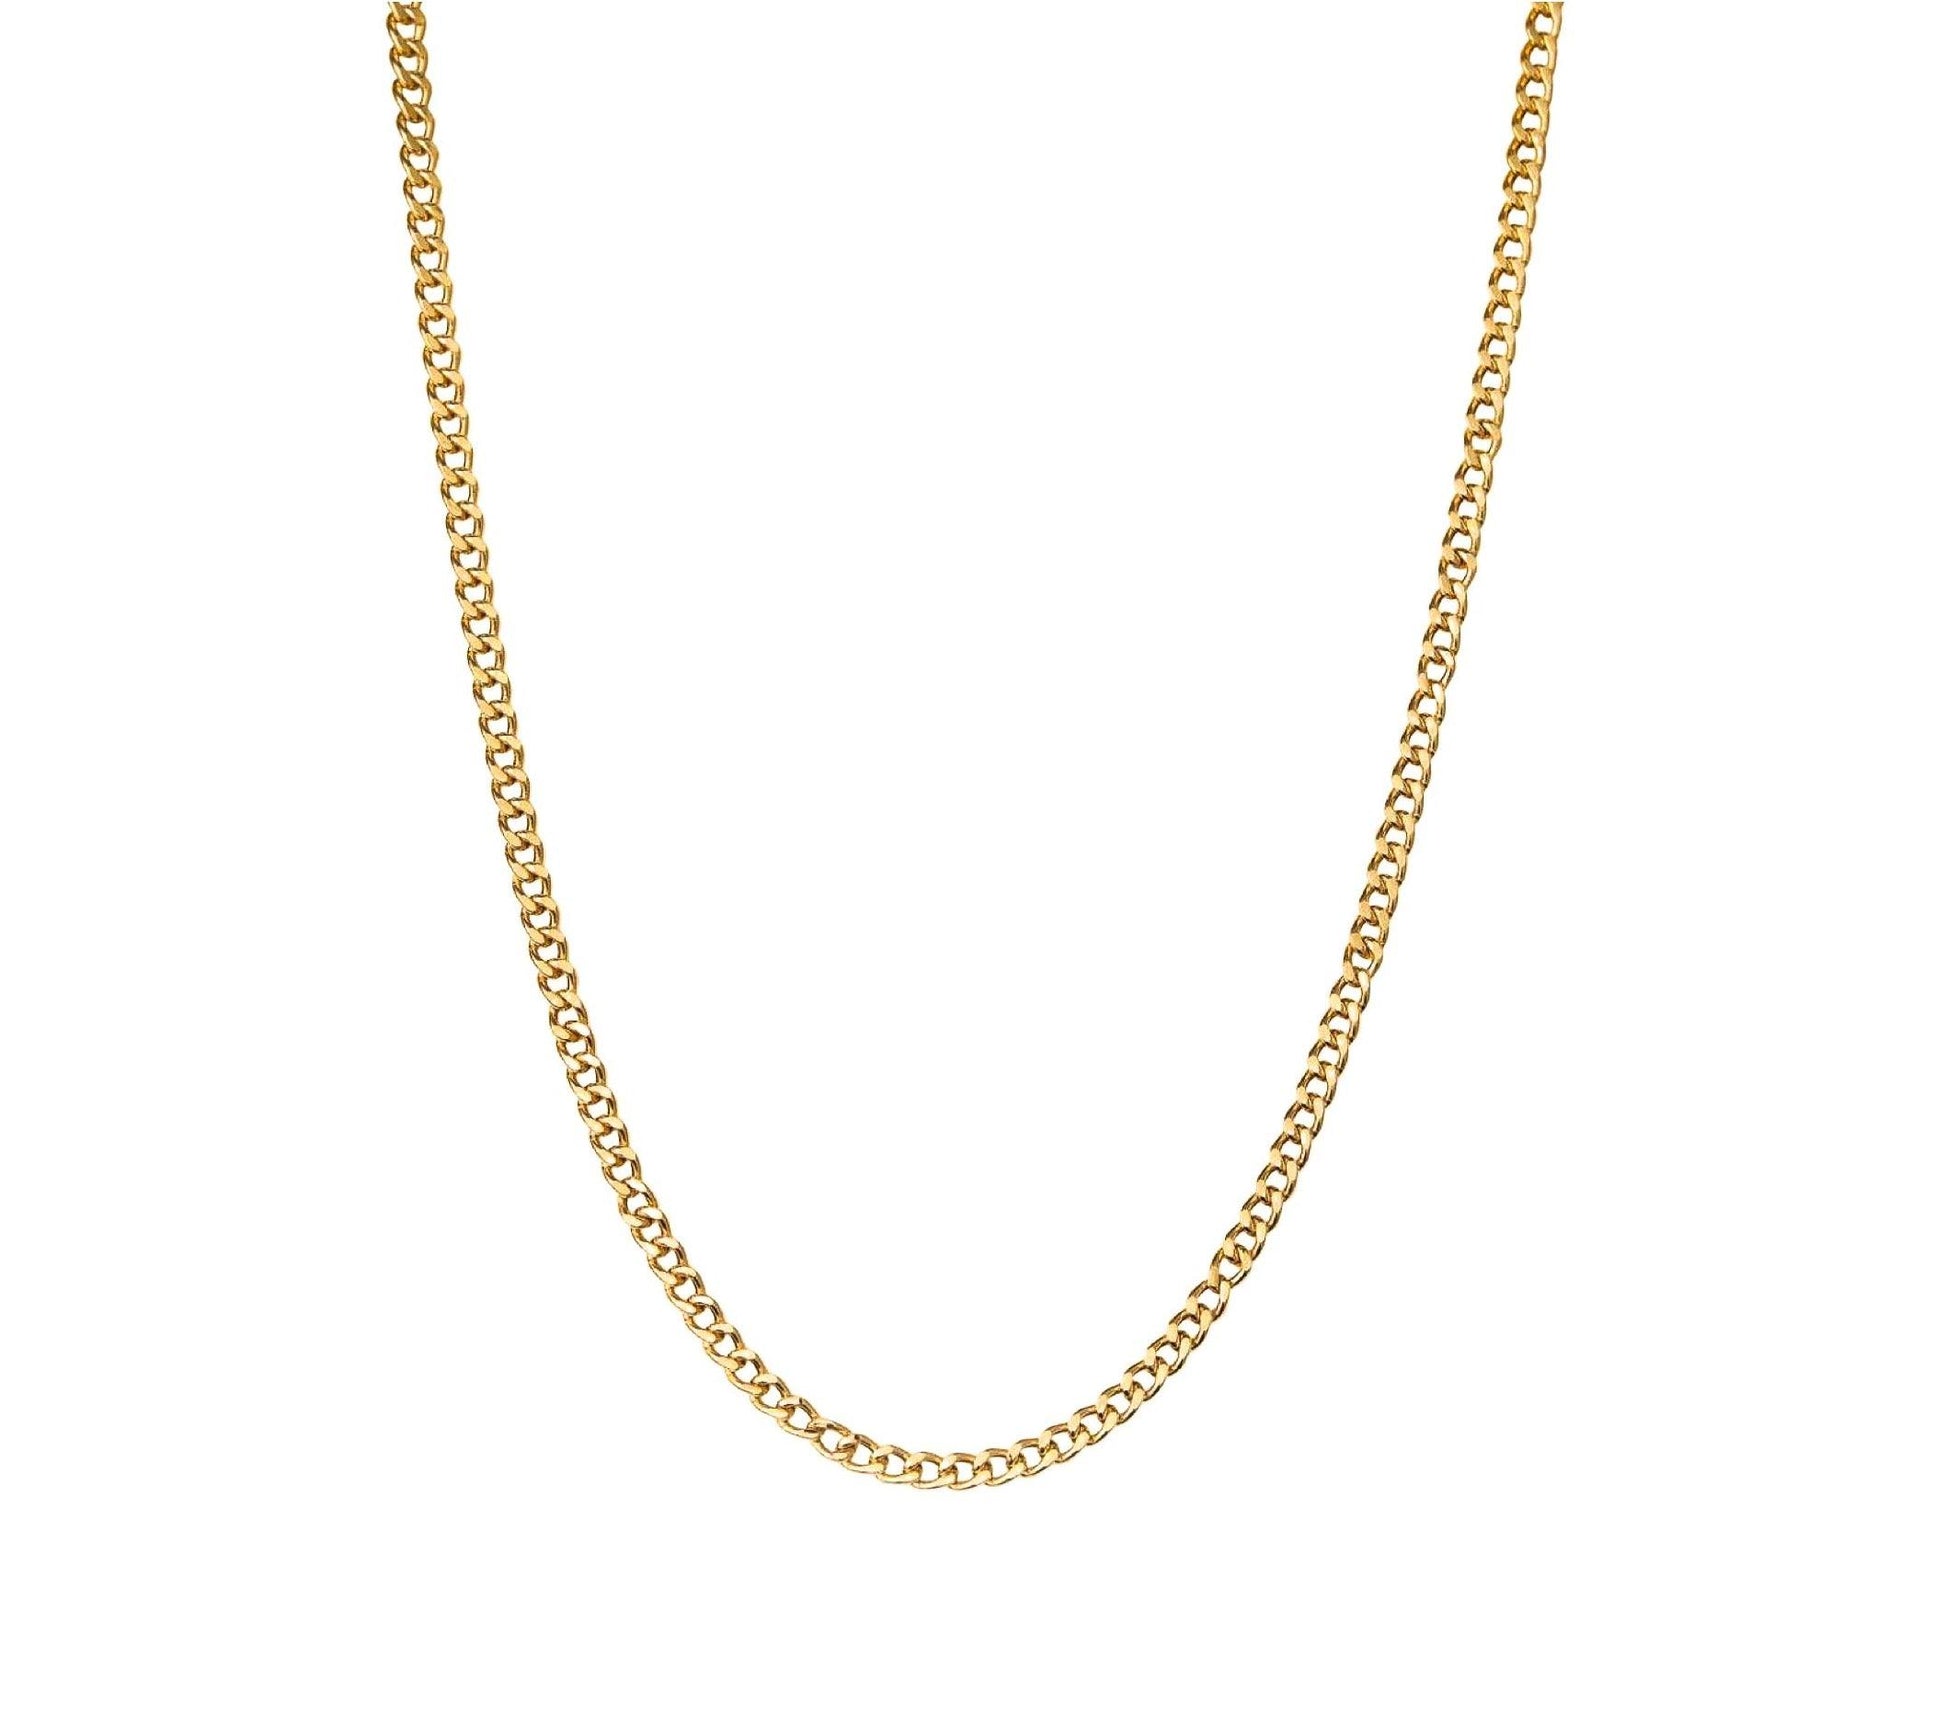 Serena Cuban Curb Link Chain - Versatile and timeless jewelry made of 18k gold-filled, perfect for solo wear or layering, ideal for all occasions